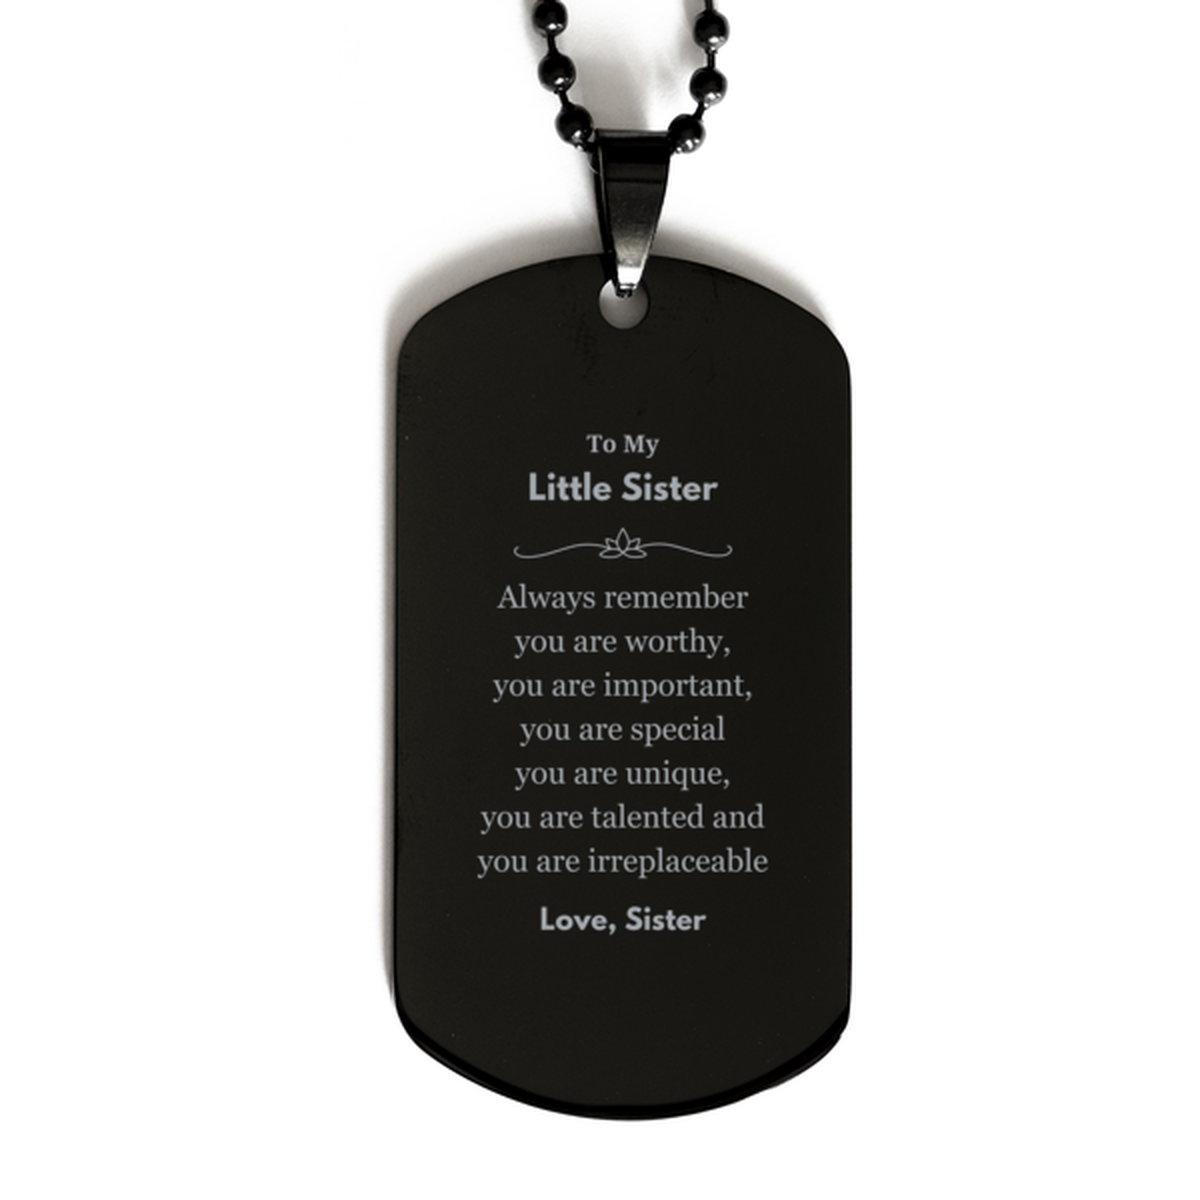 Little Sister Birthday Gifts from Sister, Inspirational Black Dog Tag for Little Sister Christmas Graduation Gifts for Little Sister Always remember you are worthy, you are important. Love, Sister